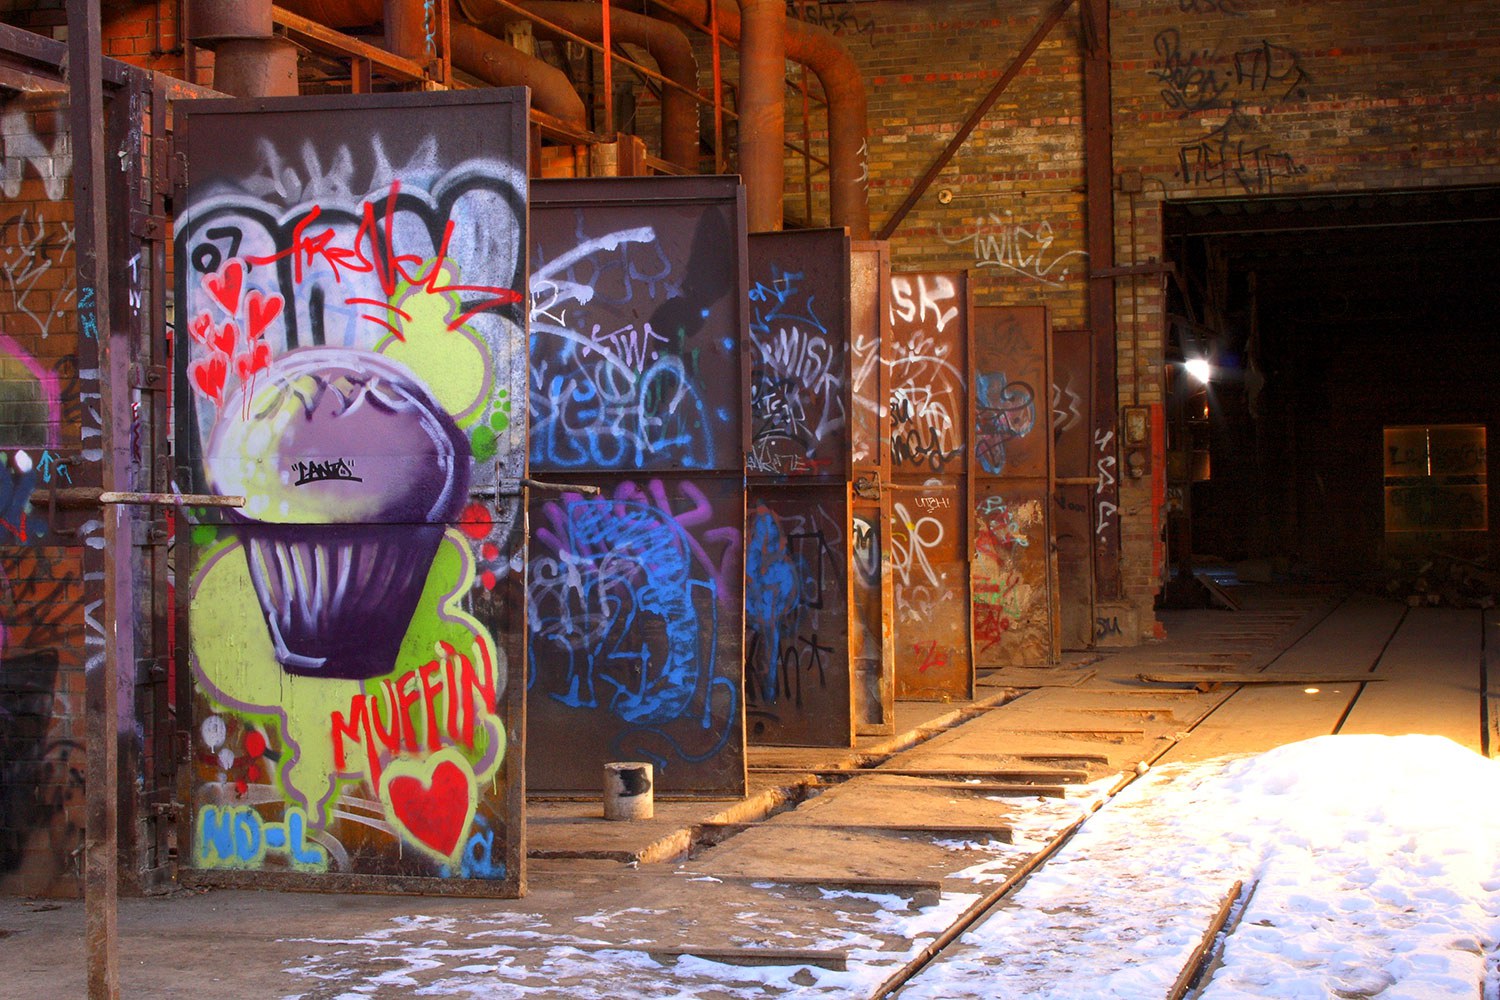 From wall to wall and kiln to kiln, thousands of individual types, styles and techniques of artistic graffiti can be found at Evergreen Brick Works, dating back to the early 1980s (Photo: Michelle Scrivener)